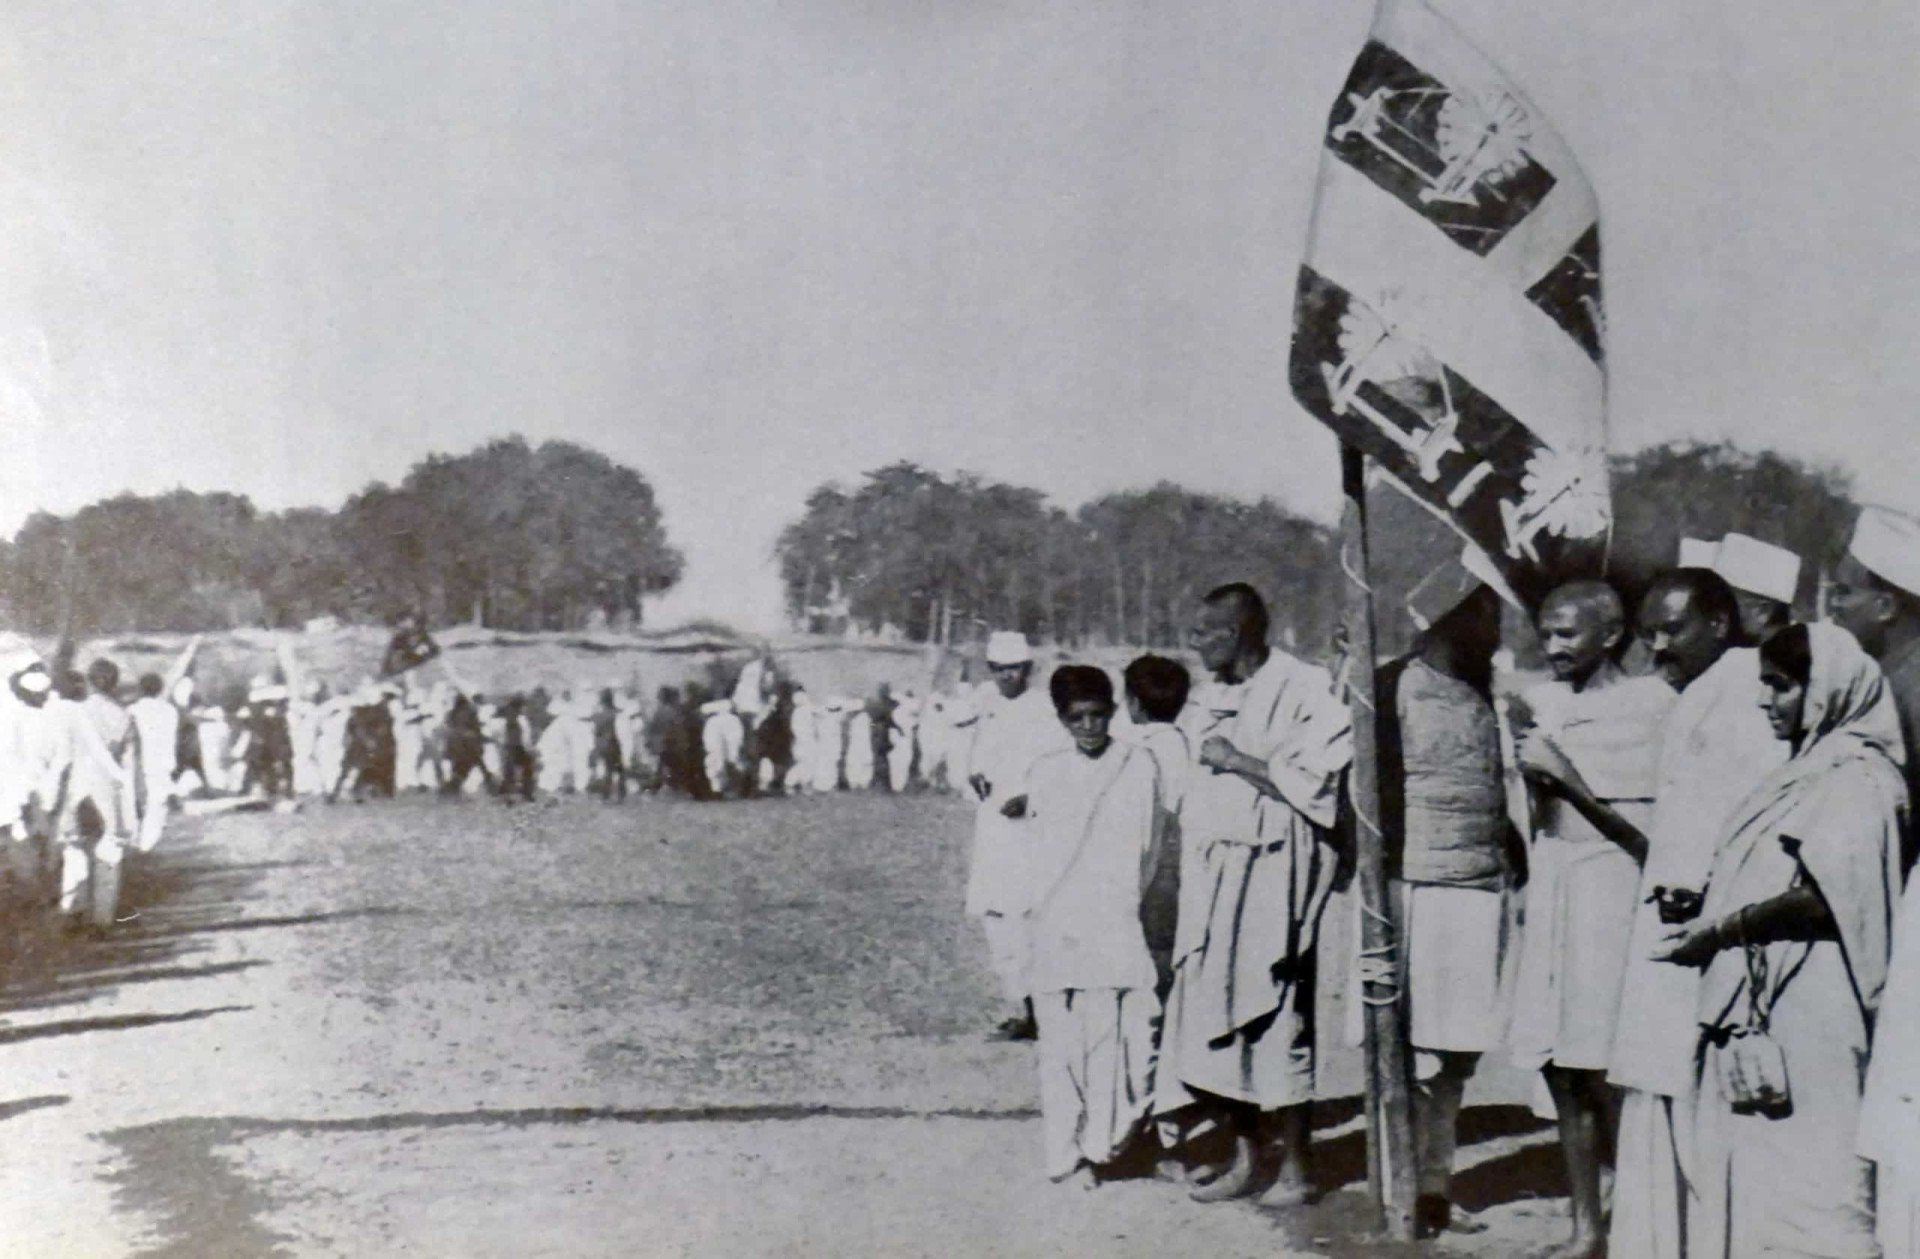 <p>The Khilafat movement was an agitation by Indian Muslims, allied with Indian nationalists, to pressure the British government to preserve the authority of the Ottoman Sultan as Caliph of Islam after the First World War. Gandhi sought political co-operation from Muslims in his fight against British imperialism by supporting the Ottoman Empire. This helped stop the increasing Hindu-Muslim violence that was spreading across the nation. However, by the end of 1922 the Khilafat movement had collapsed and deadly religious riots reappeared in numerous cities. </p><p>You may also like:<a href="https://www.starsinsider.com/n/376995?utm_source=msn.com&utm_medium=display&utm_campaign=referral_description&utm_content=447666v5en-us"> Stars who have come out as LGBT in 2019</a></p>